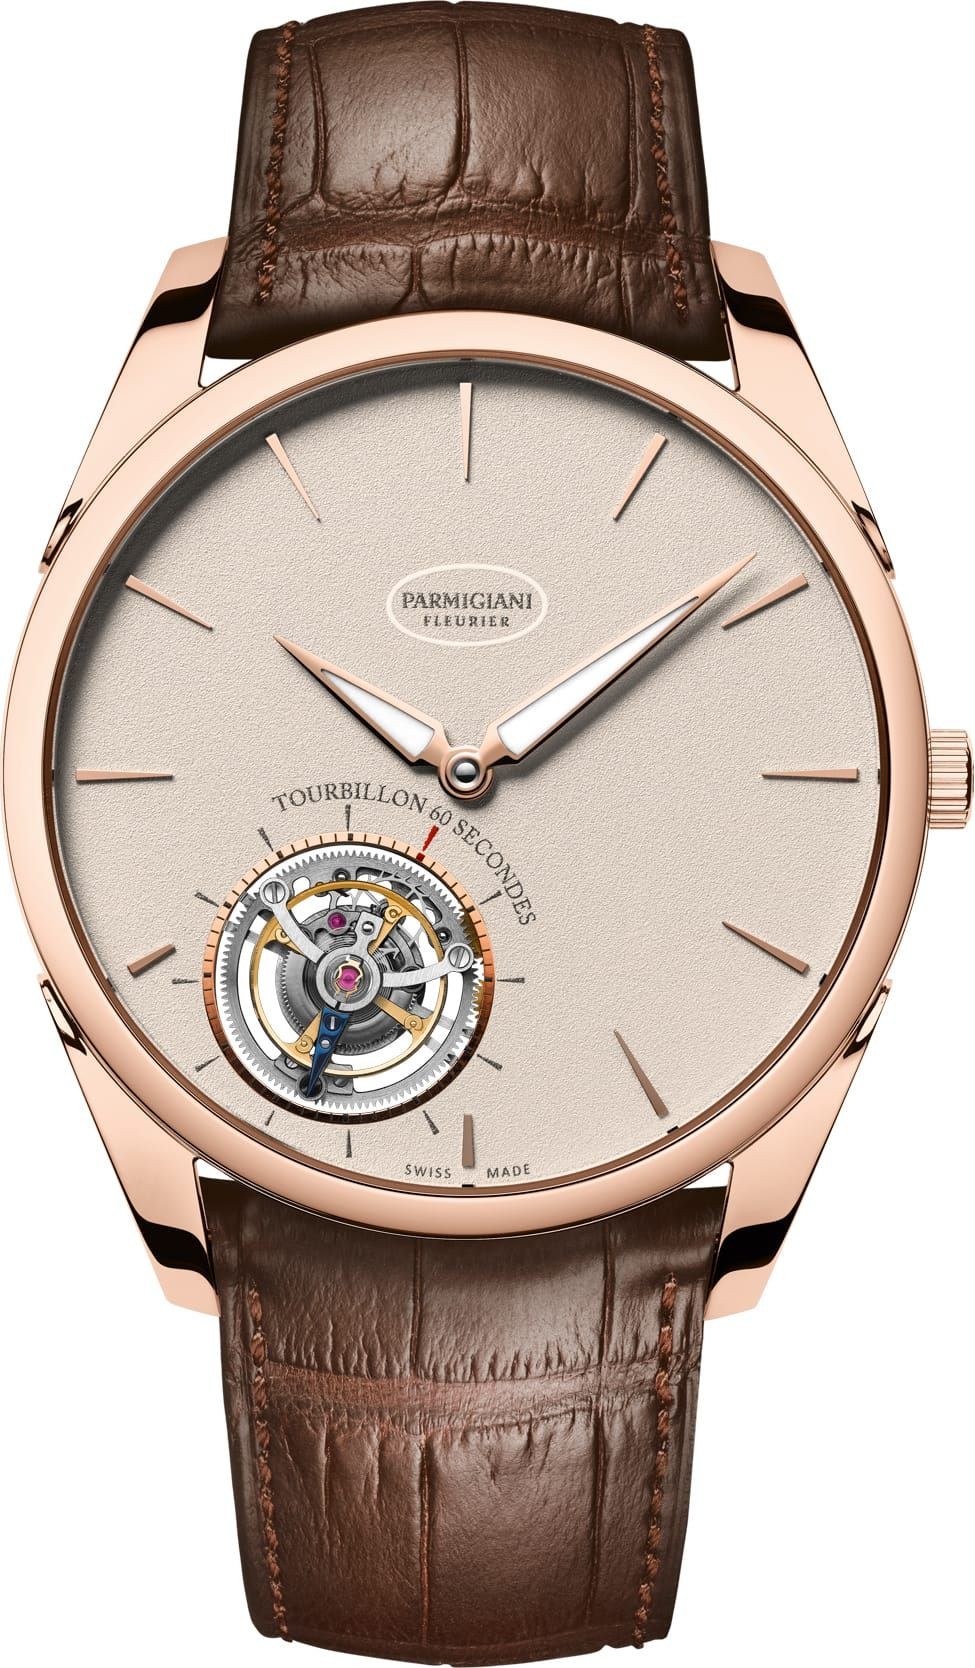 Tonda 1950 Tourbillon 40.20mm Automatic in Rose Gold on Brown Alligator Leather Strap with Grained White Dial